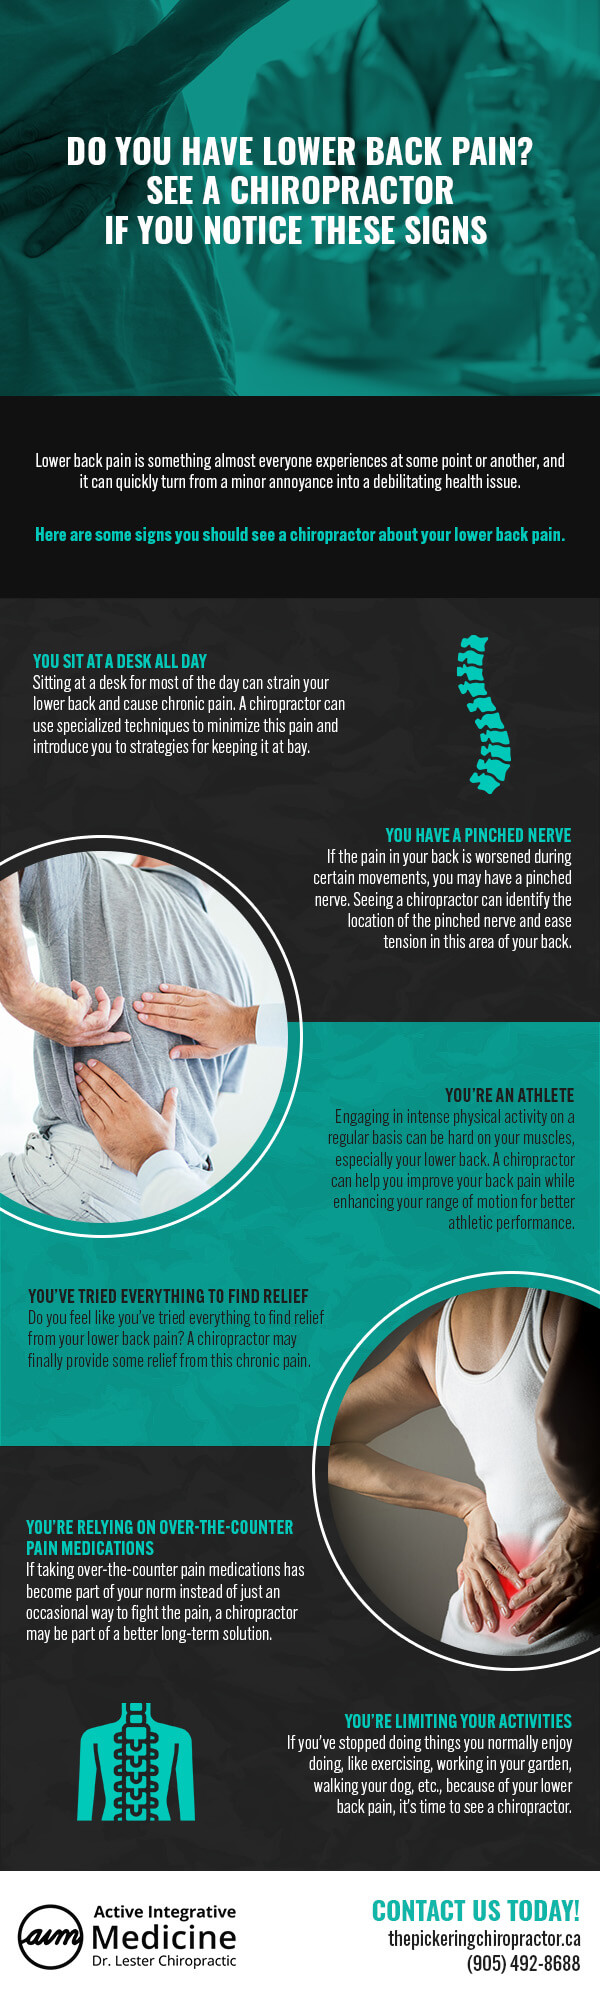 Do You Have Lower Back Pain? See a Chiropractor if You Notice These Signs 